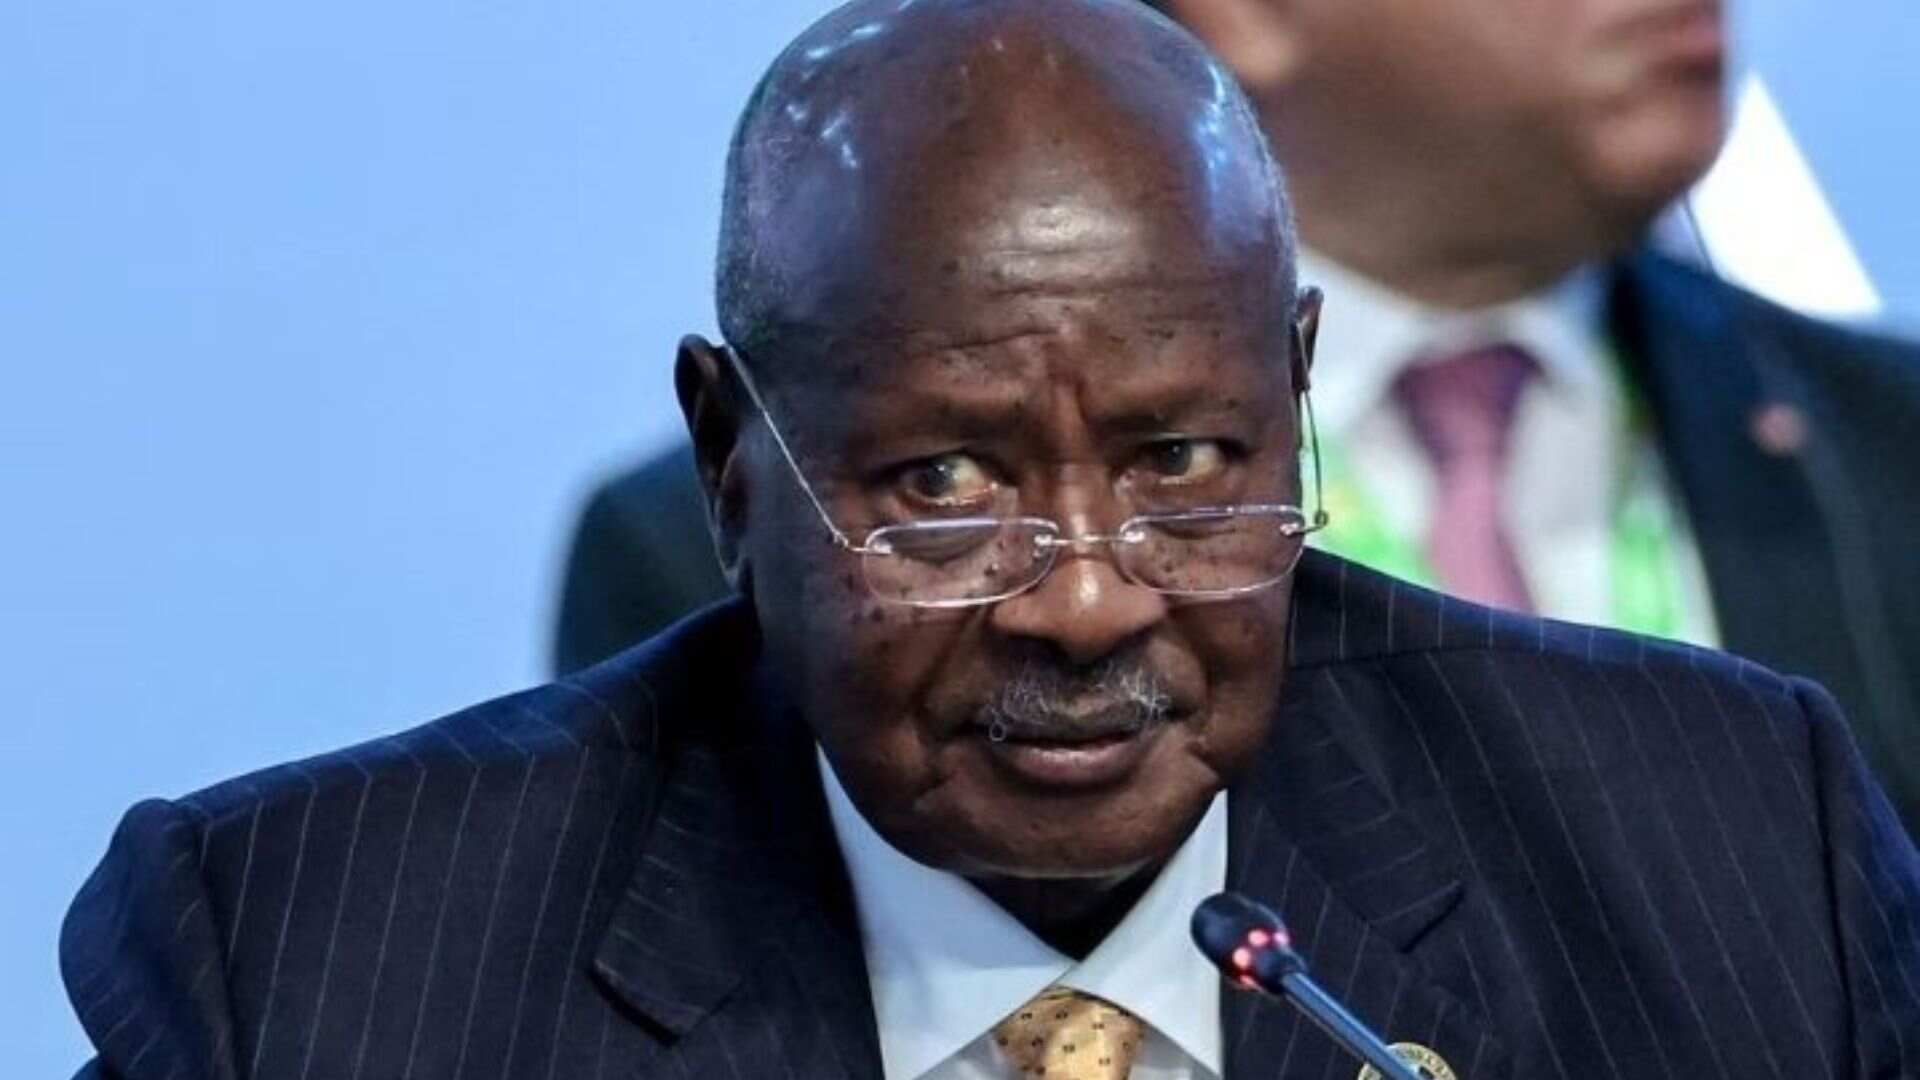 Uganda’s President Museveni Warns Against Protestors, Calling Them “Playing with Fire”